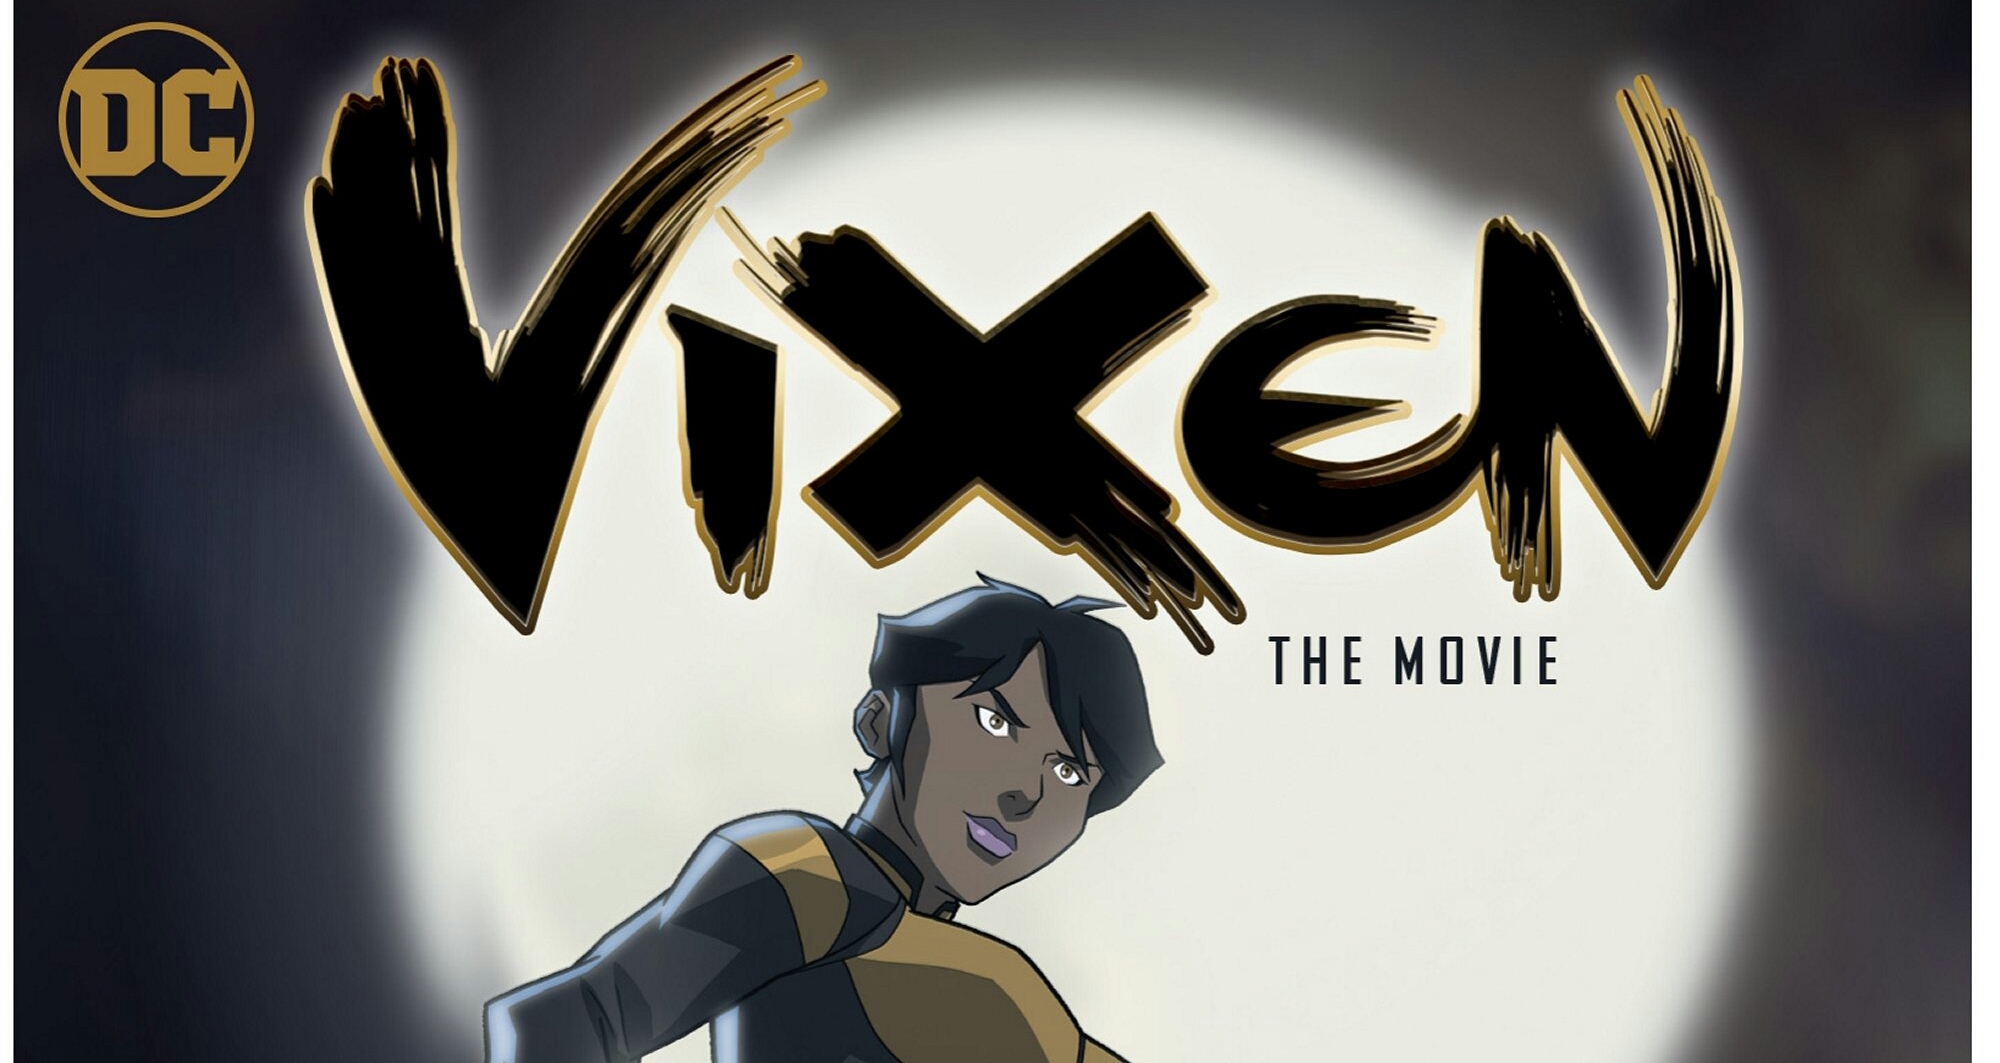 CW Seed's 'Vixen' Comes To Blu-ray! – 